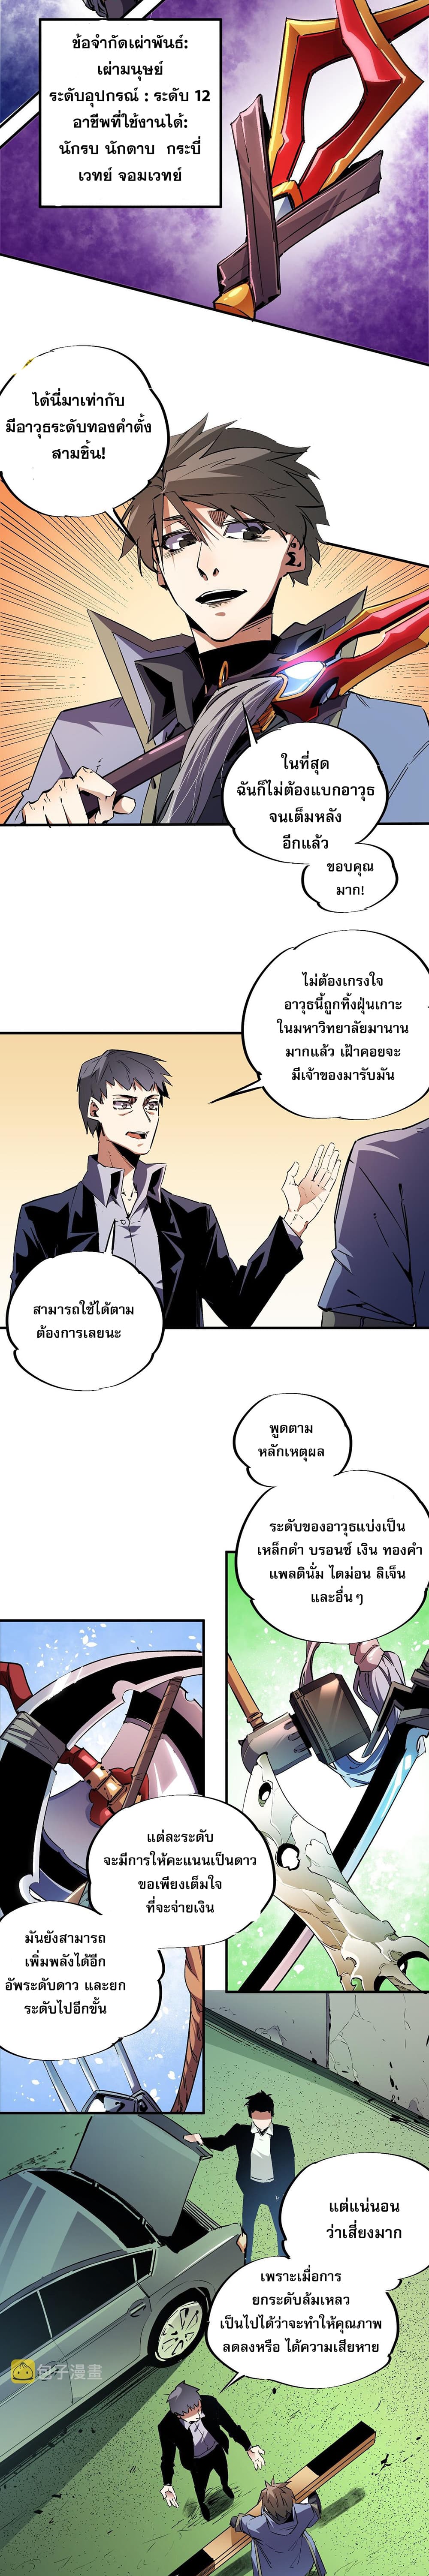 Job Changing for the Entire Population: The Jobless Me Will Terminate the Gods ฉันคือผู้เล่นไร้อาชีพที่สังหารเหล่าเทพ 11-11